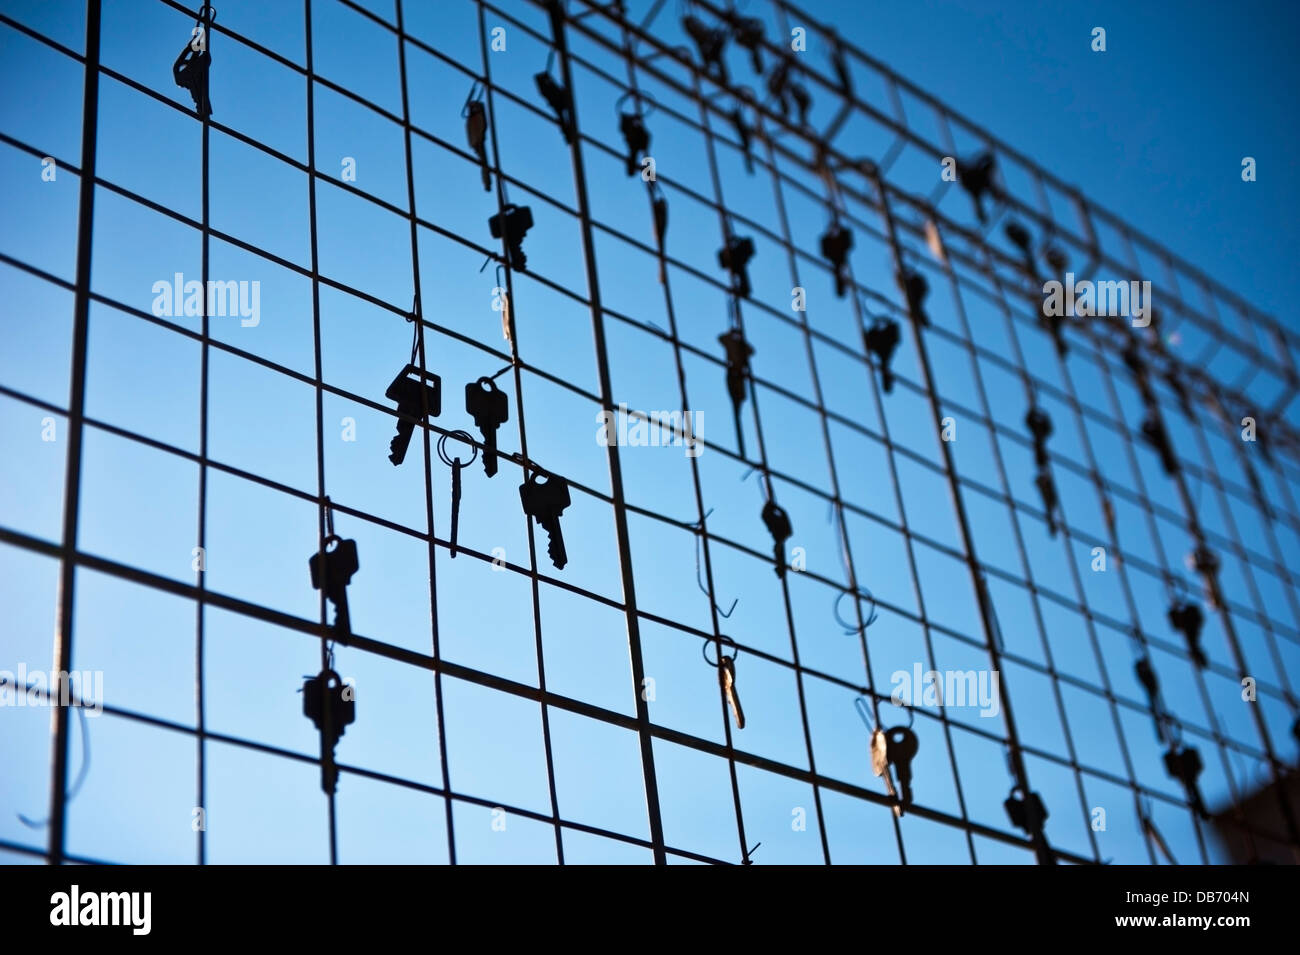 Keys hooked to a metal grid type fence at dusk Stock Photo